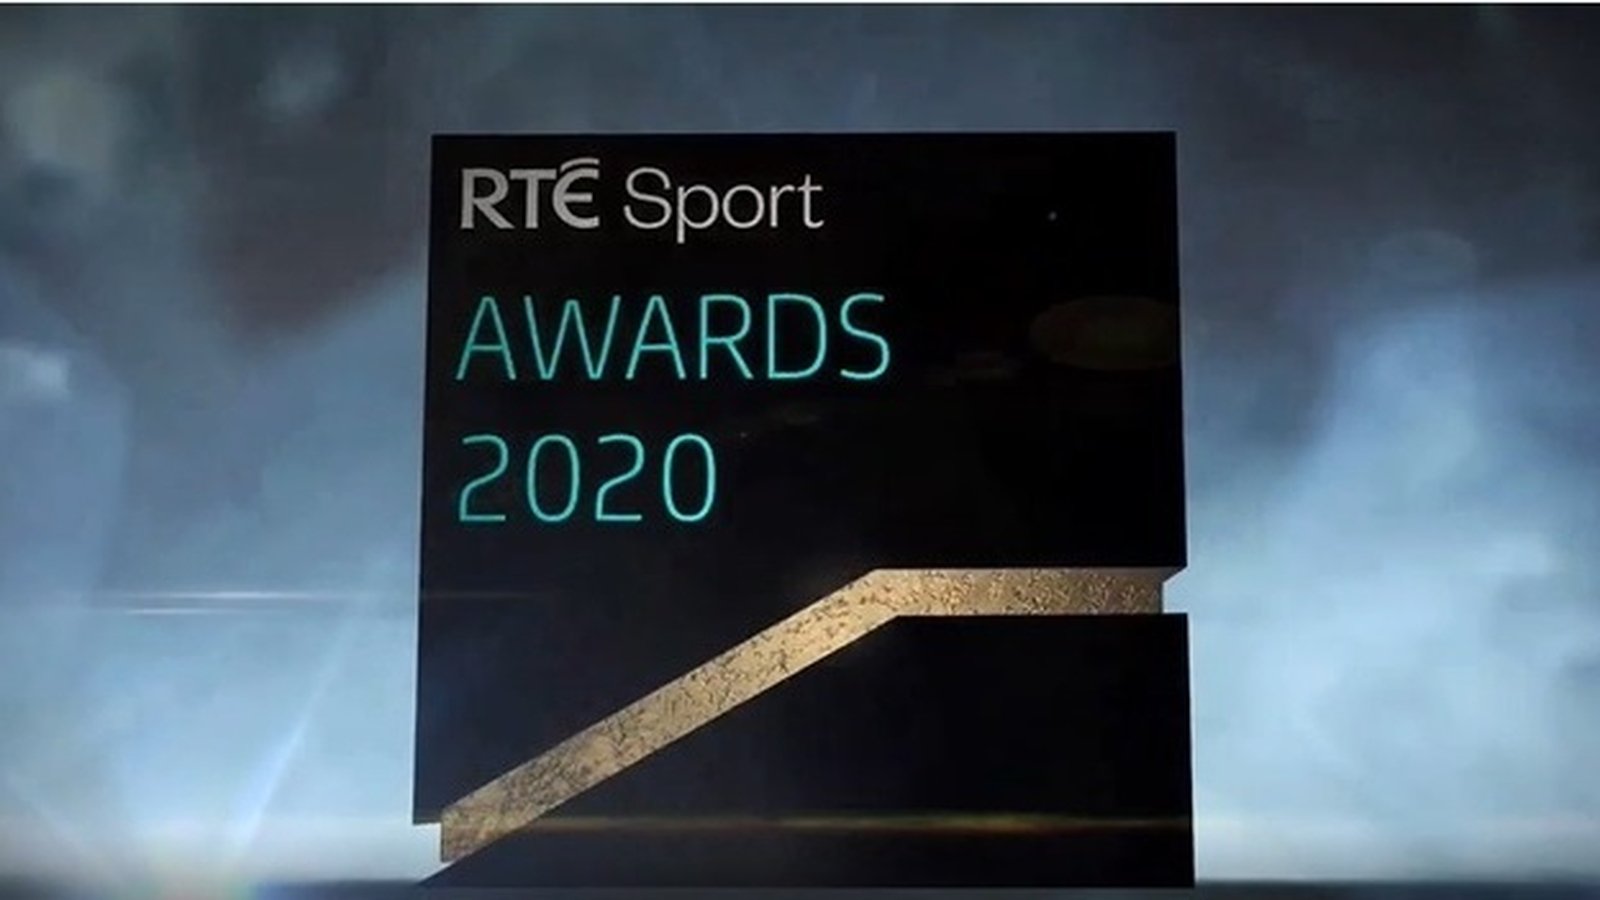 Disclosure of competitors for the RTÉ Sport Award

